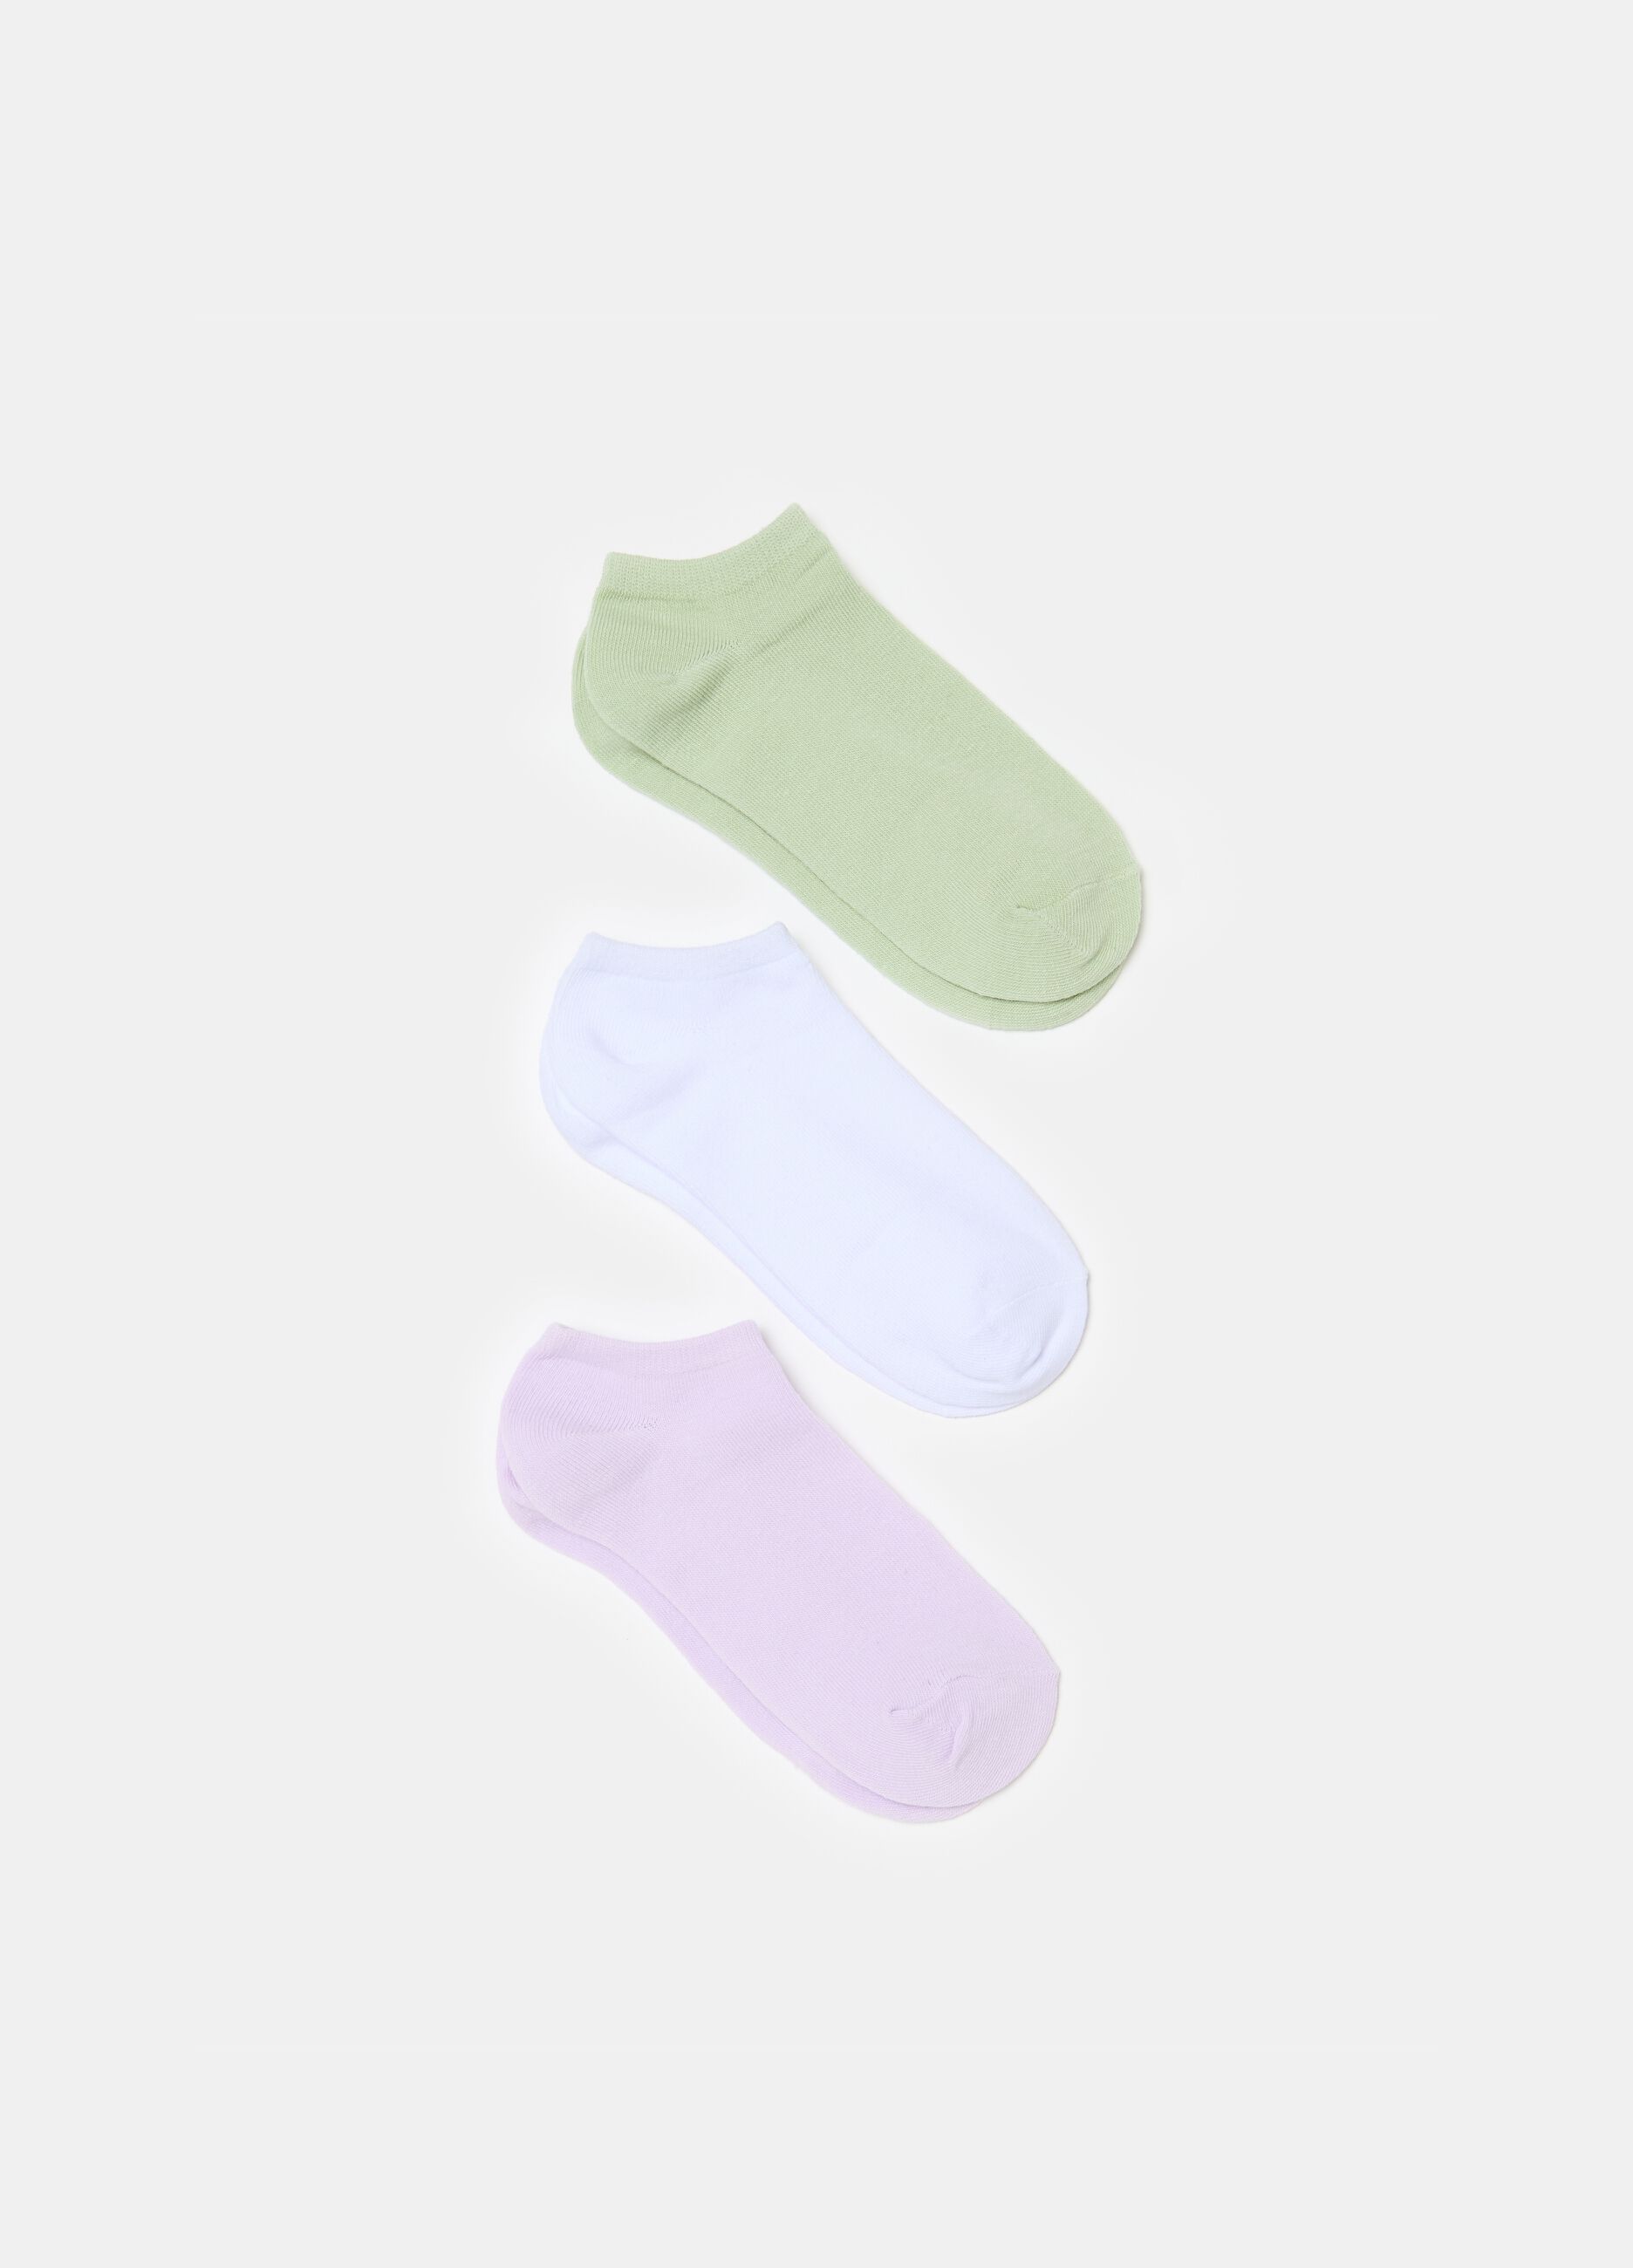 Three-pair pack shoe liners in organic cotton